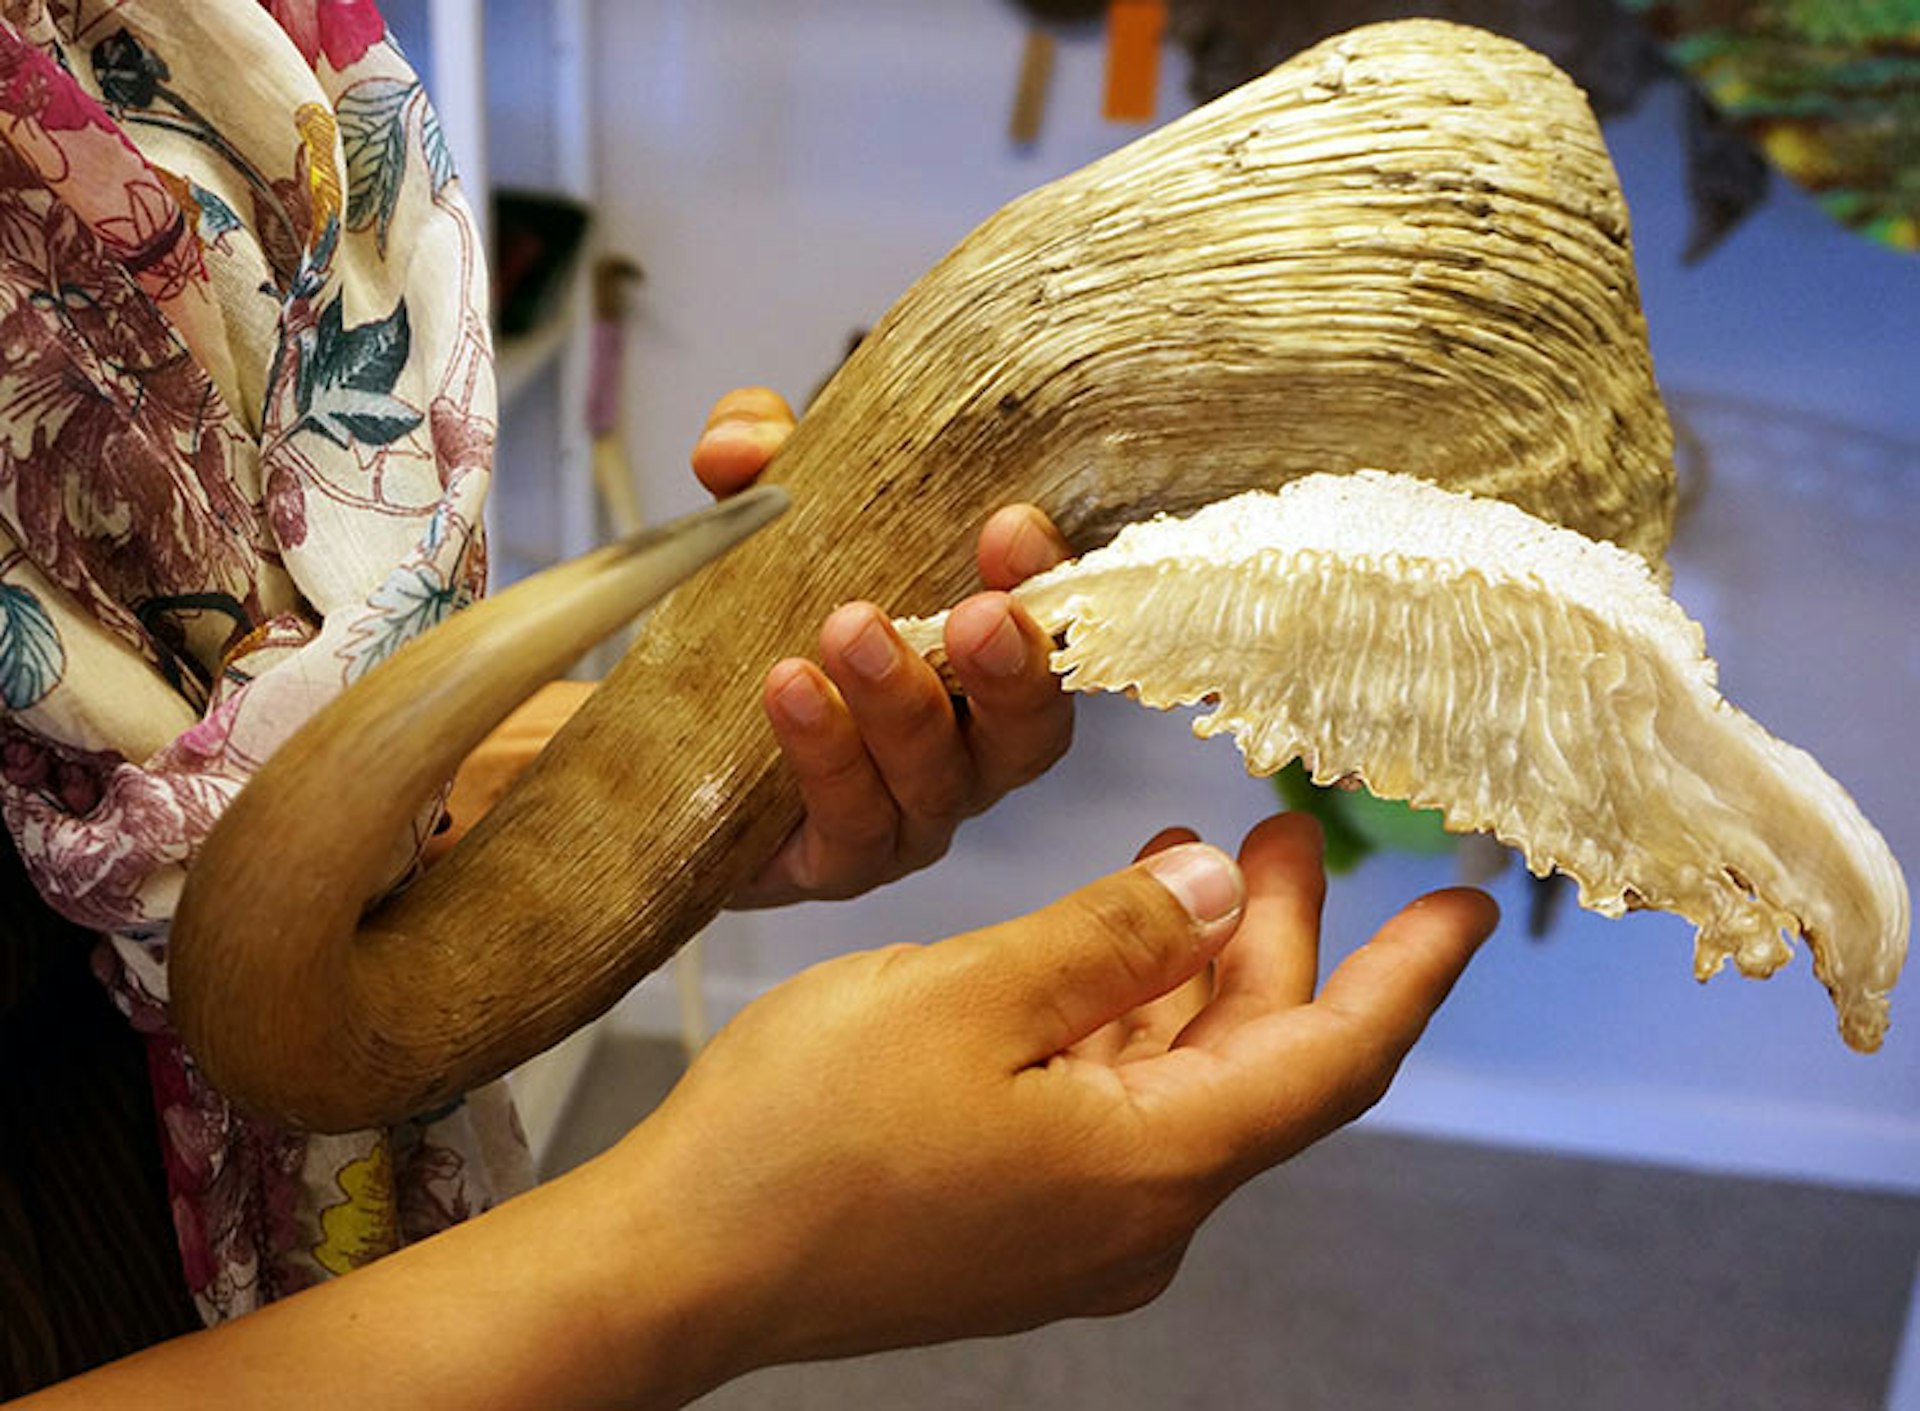 Close-up of a woman's hands delicately holding the large curved horns of a muskox, in a craft shop in Kangerlussuaq, Greenland.